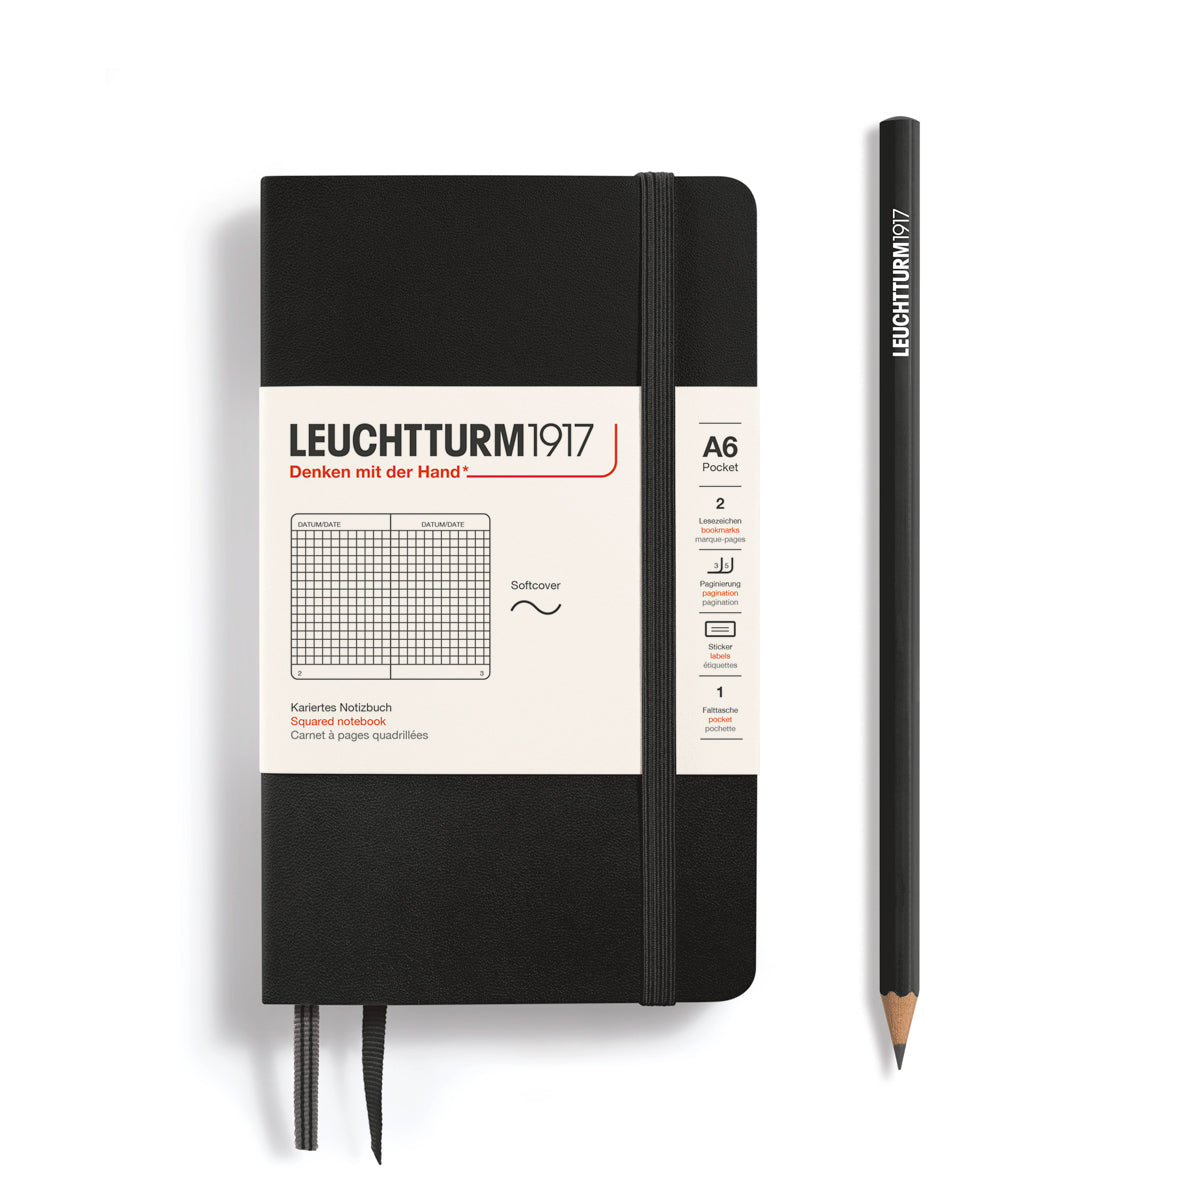 LEUCHTTURM1917 Notebook A6 Pocket Softcover in black and squared inside at Penny Black